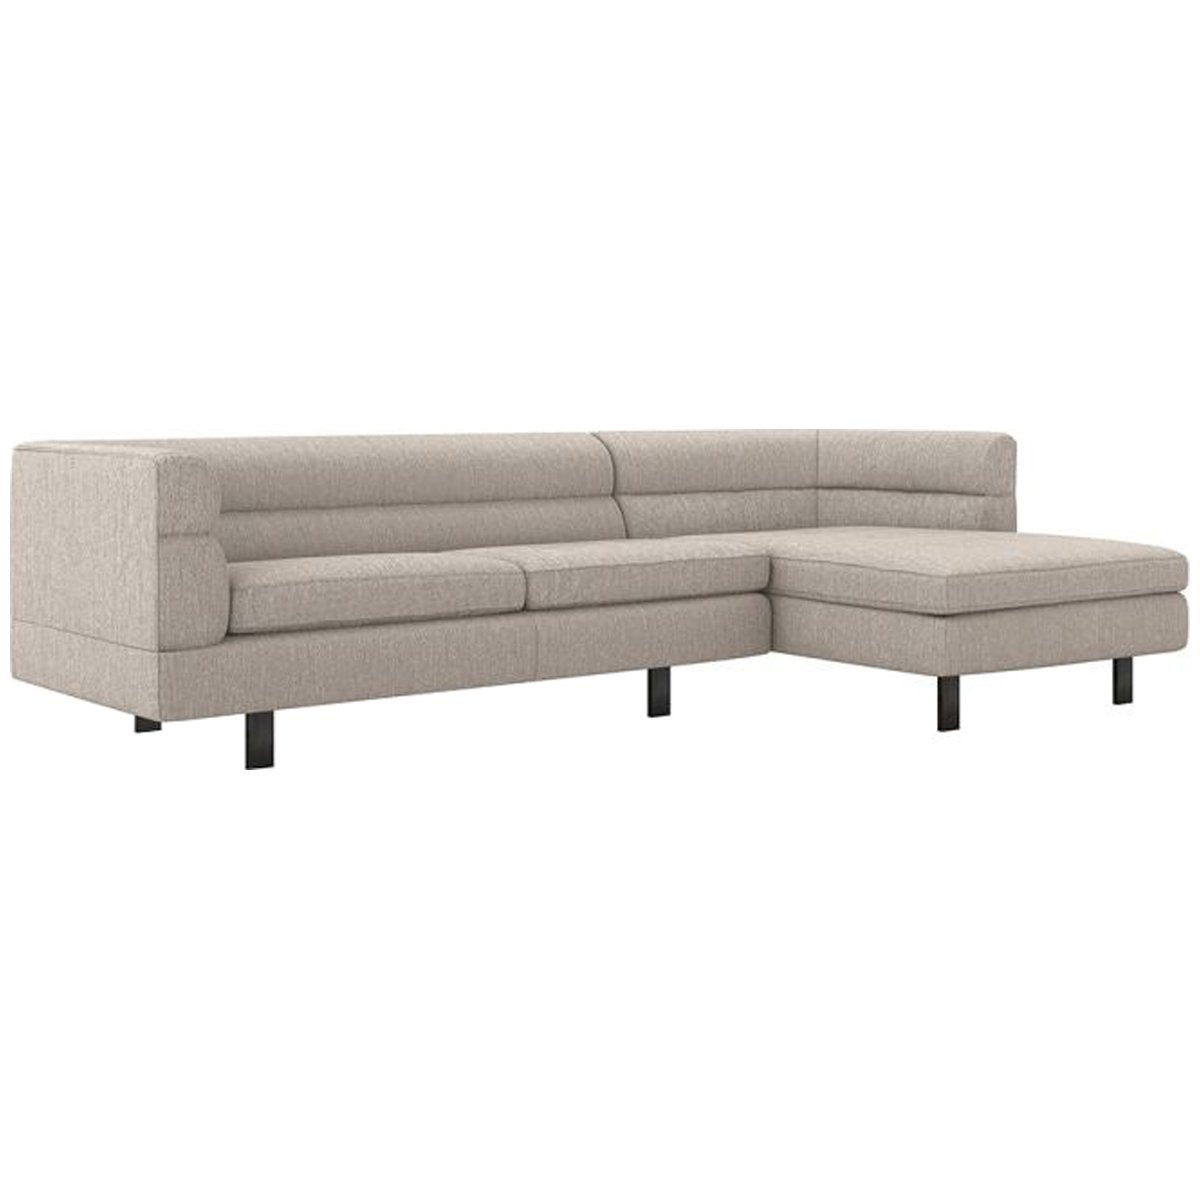 Interlude Home Ornette Sectional - Luxe Chenille